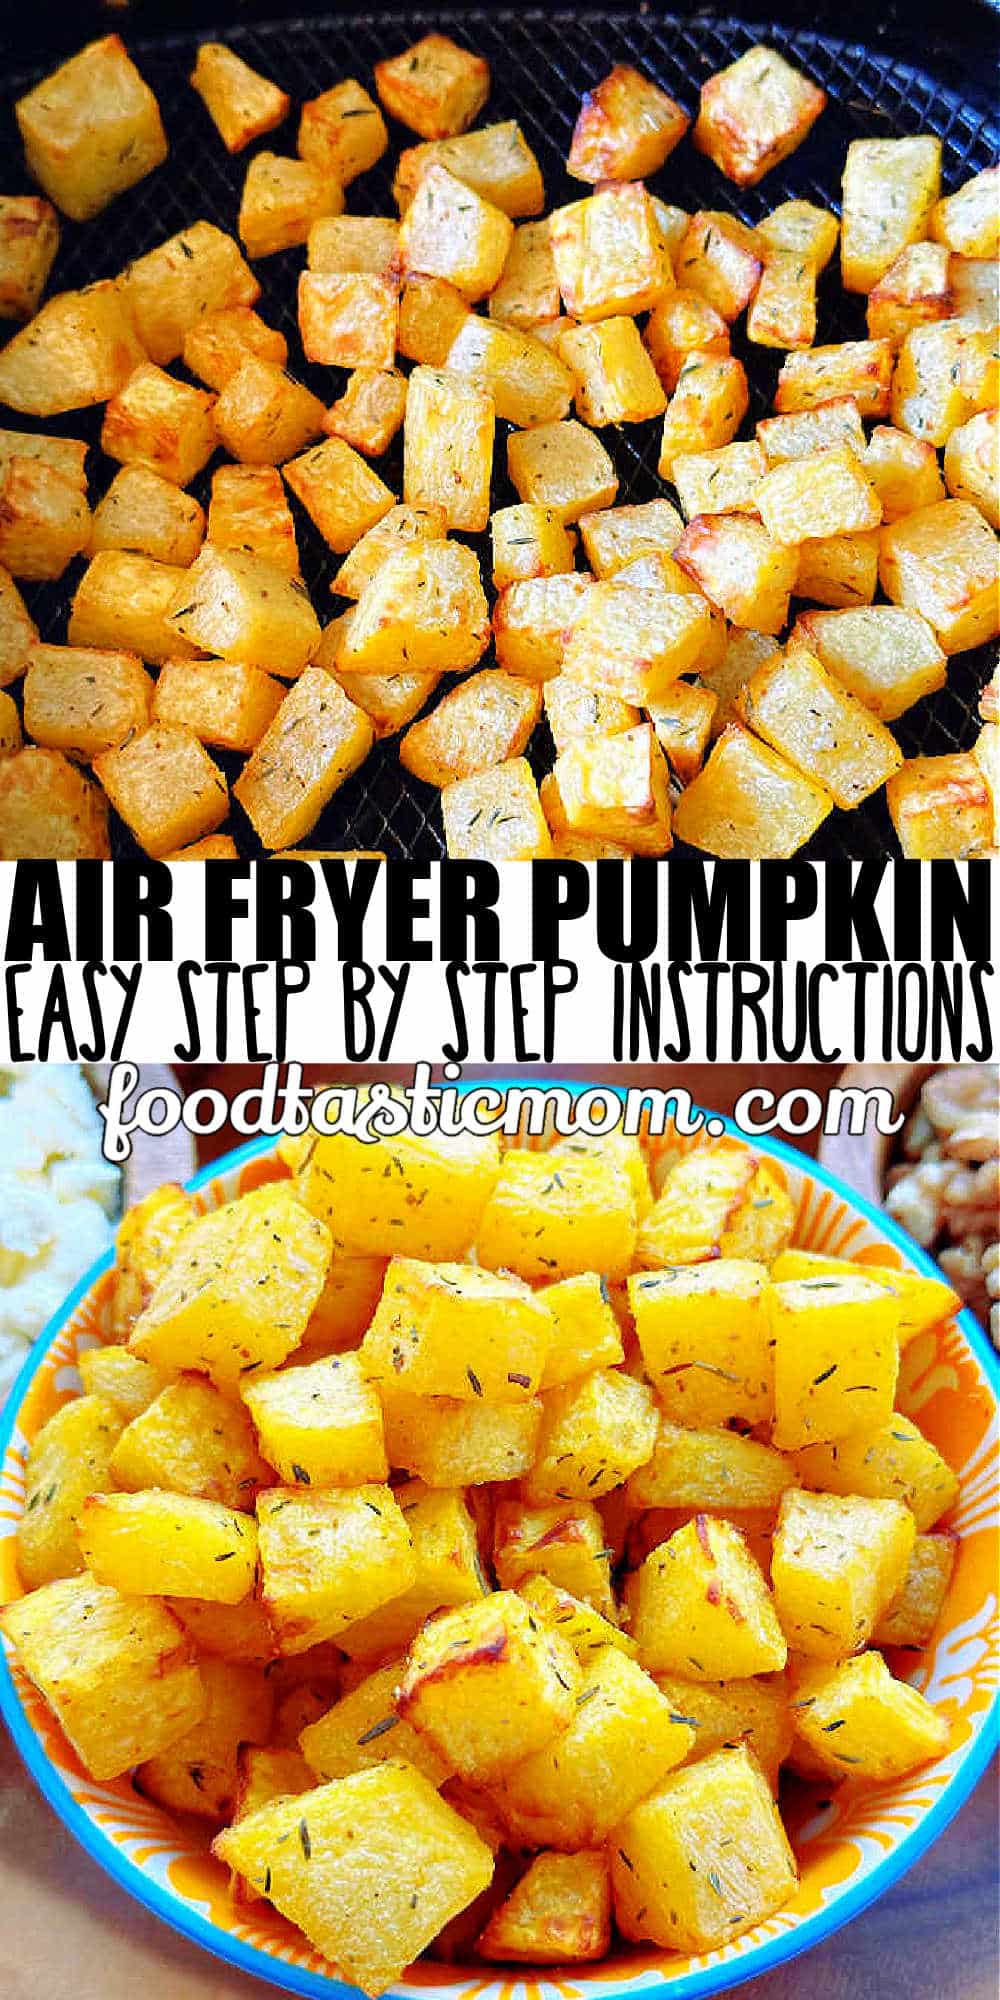 Your air fryer is the best way to make perfectly roasted pumpkin cubes from a fresh pumpkin for a healthy snack or adding to a beautiful fall salad. via @foodtasticmom